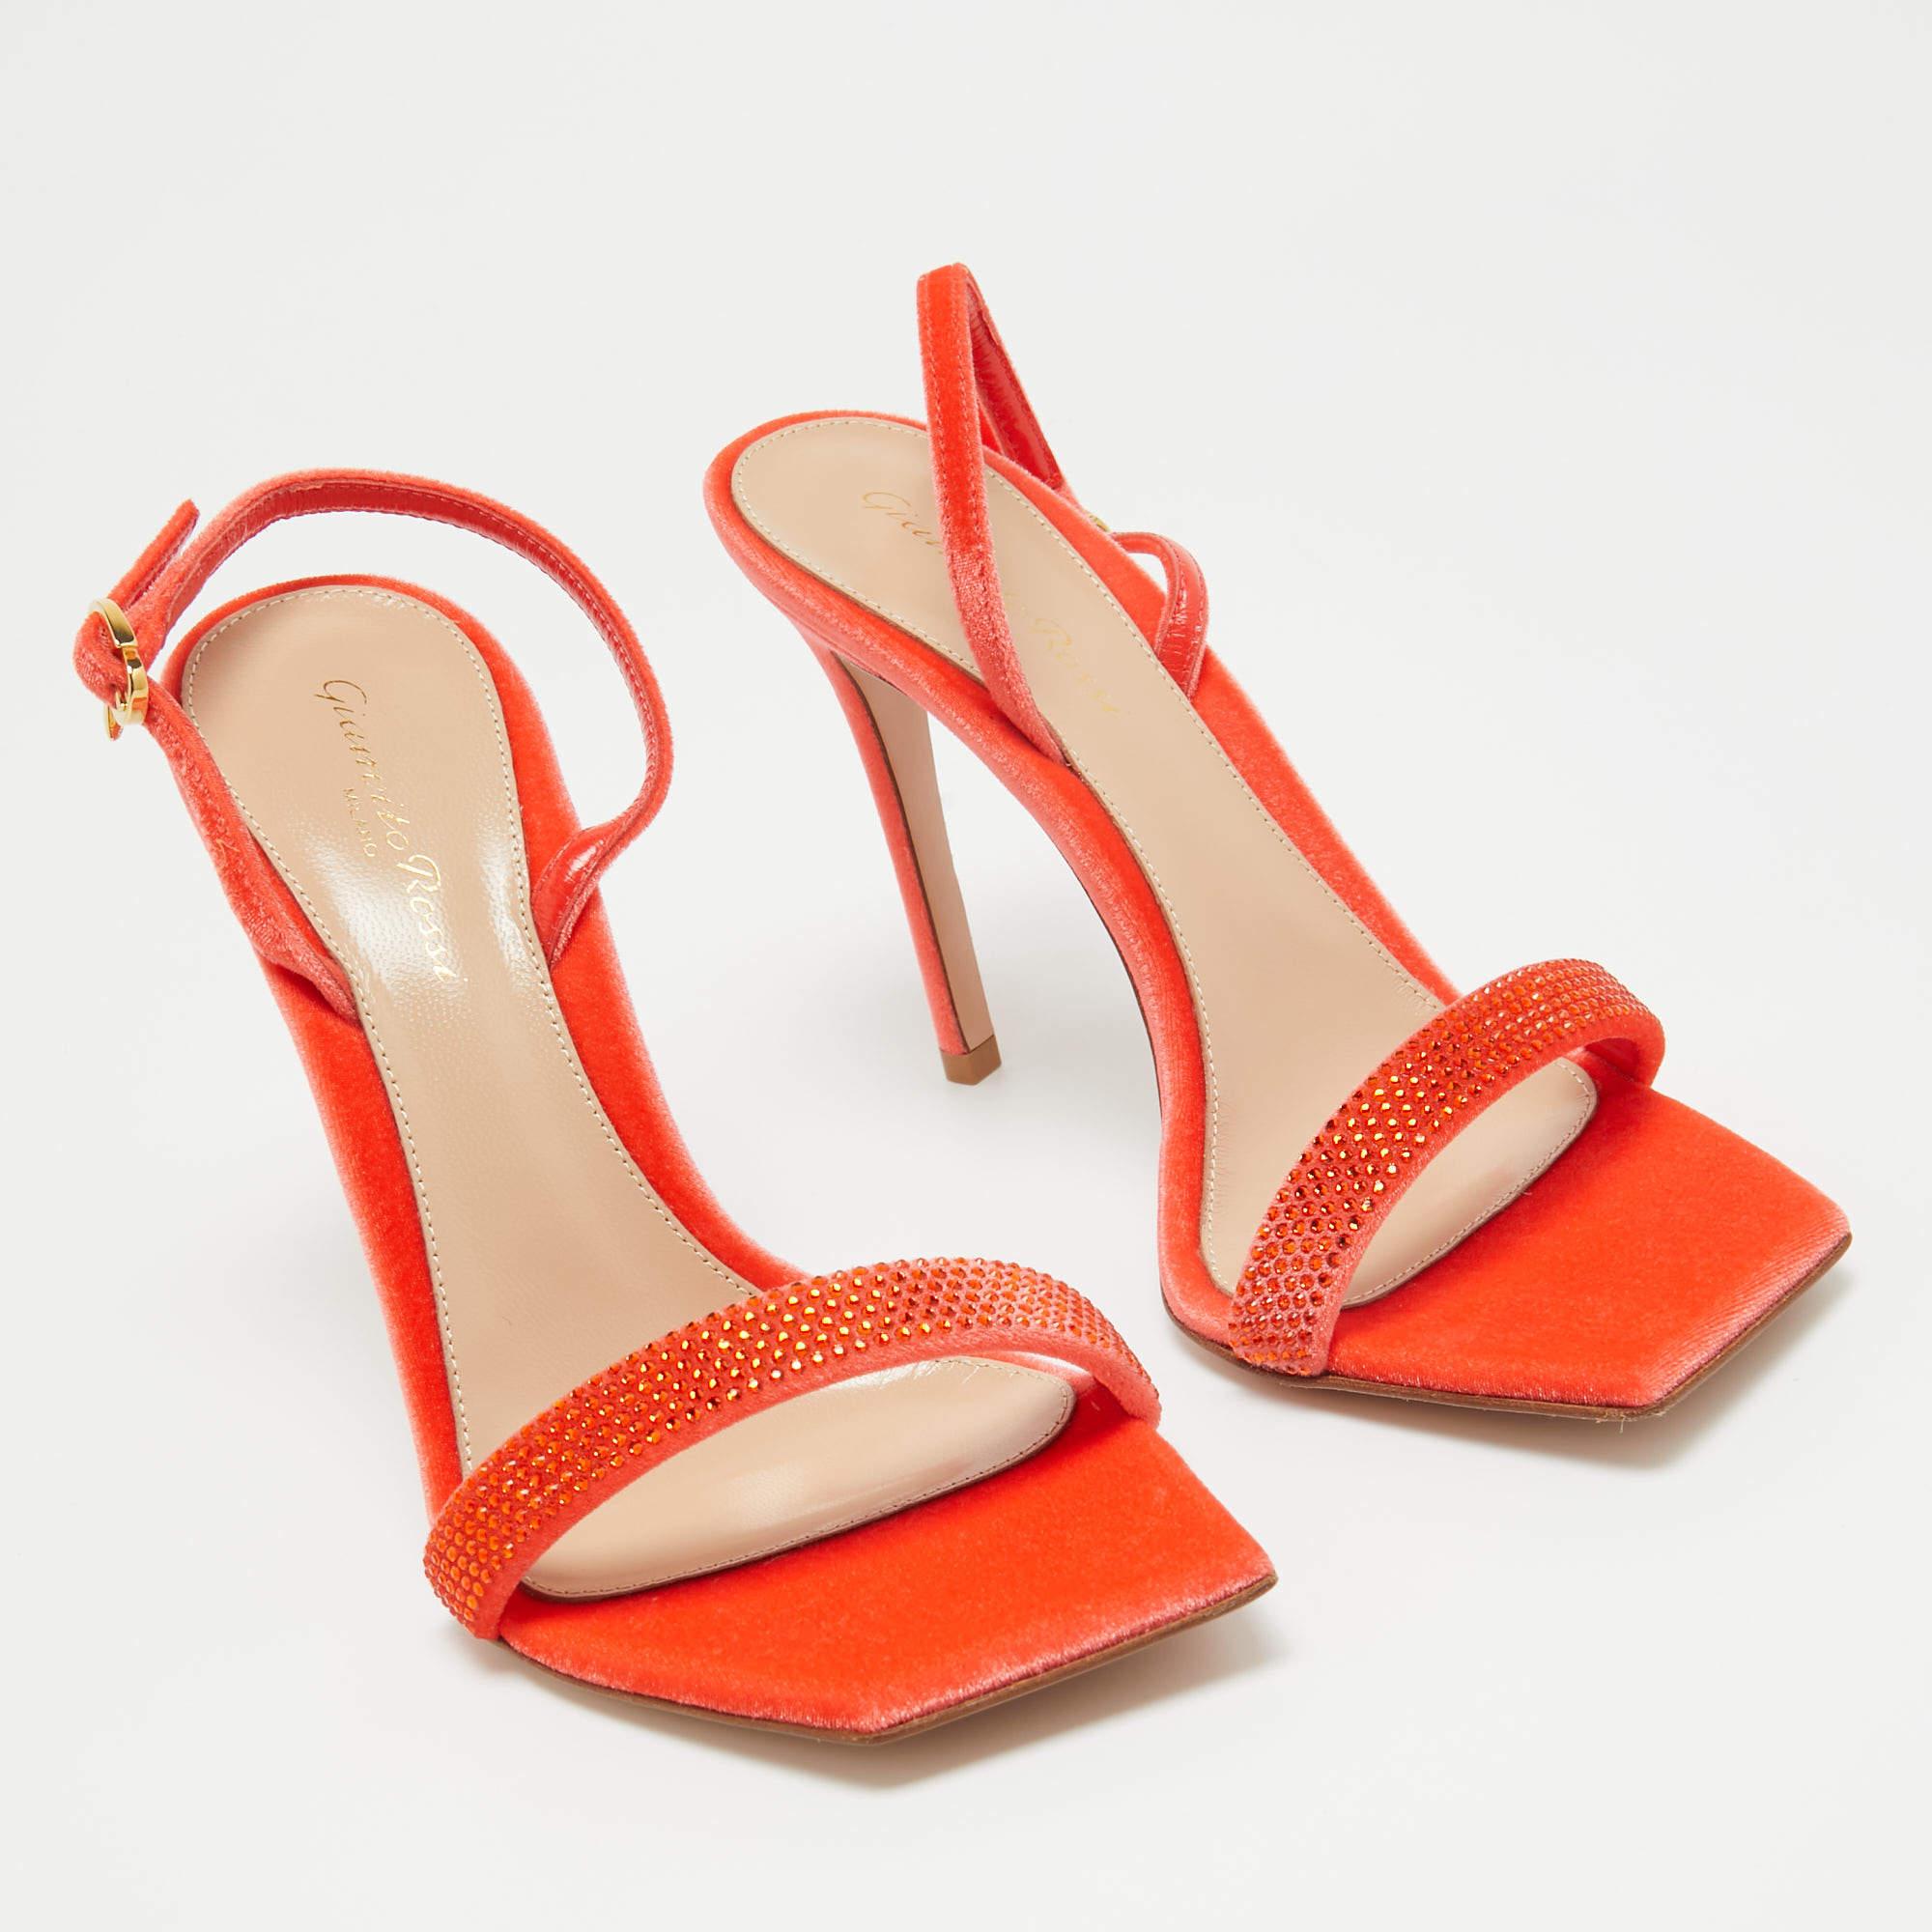 In vibrant orange leather, the Gianvito Rossi Minas sandals exude confident charm. Delicate straps gracefully embrace the foot, while a sturdy heel provides stability and style. With impeccable craftsmanship and timeless design, these sandals